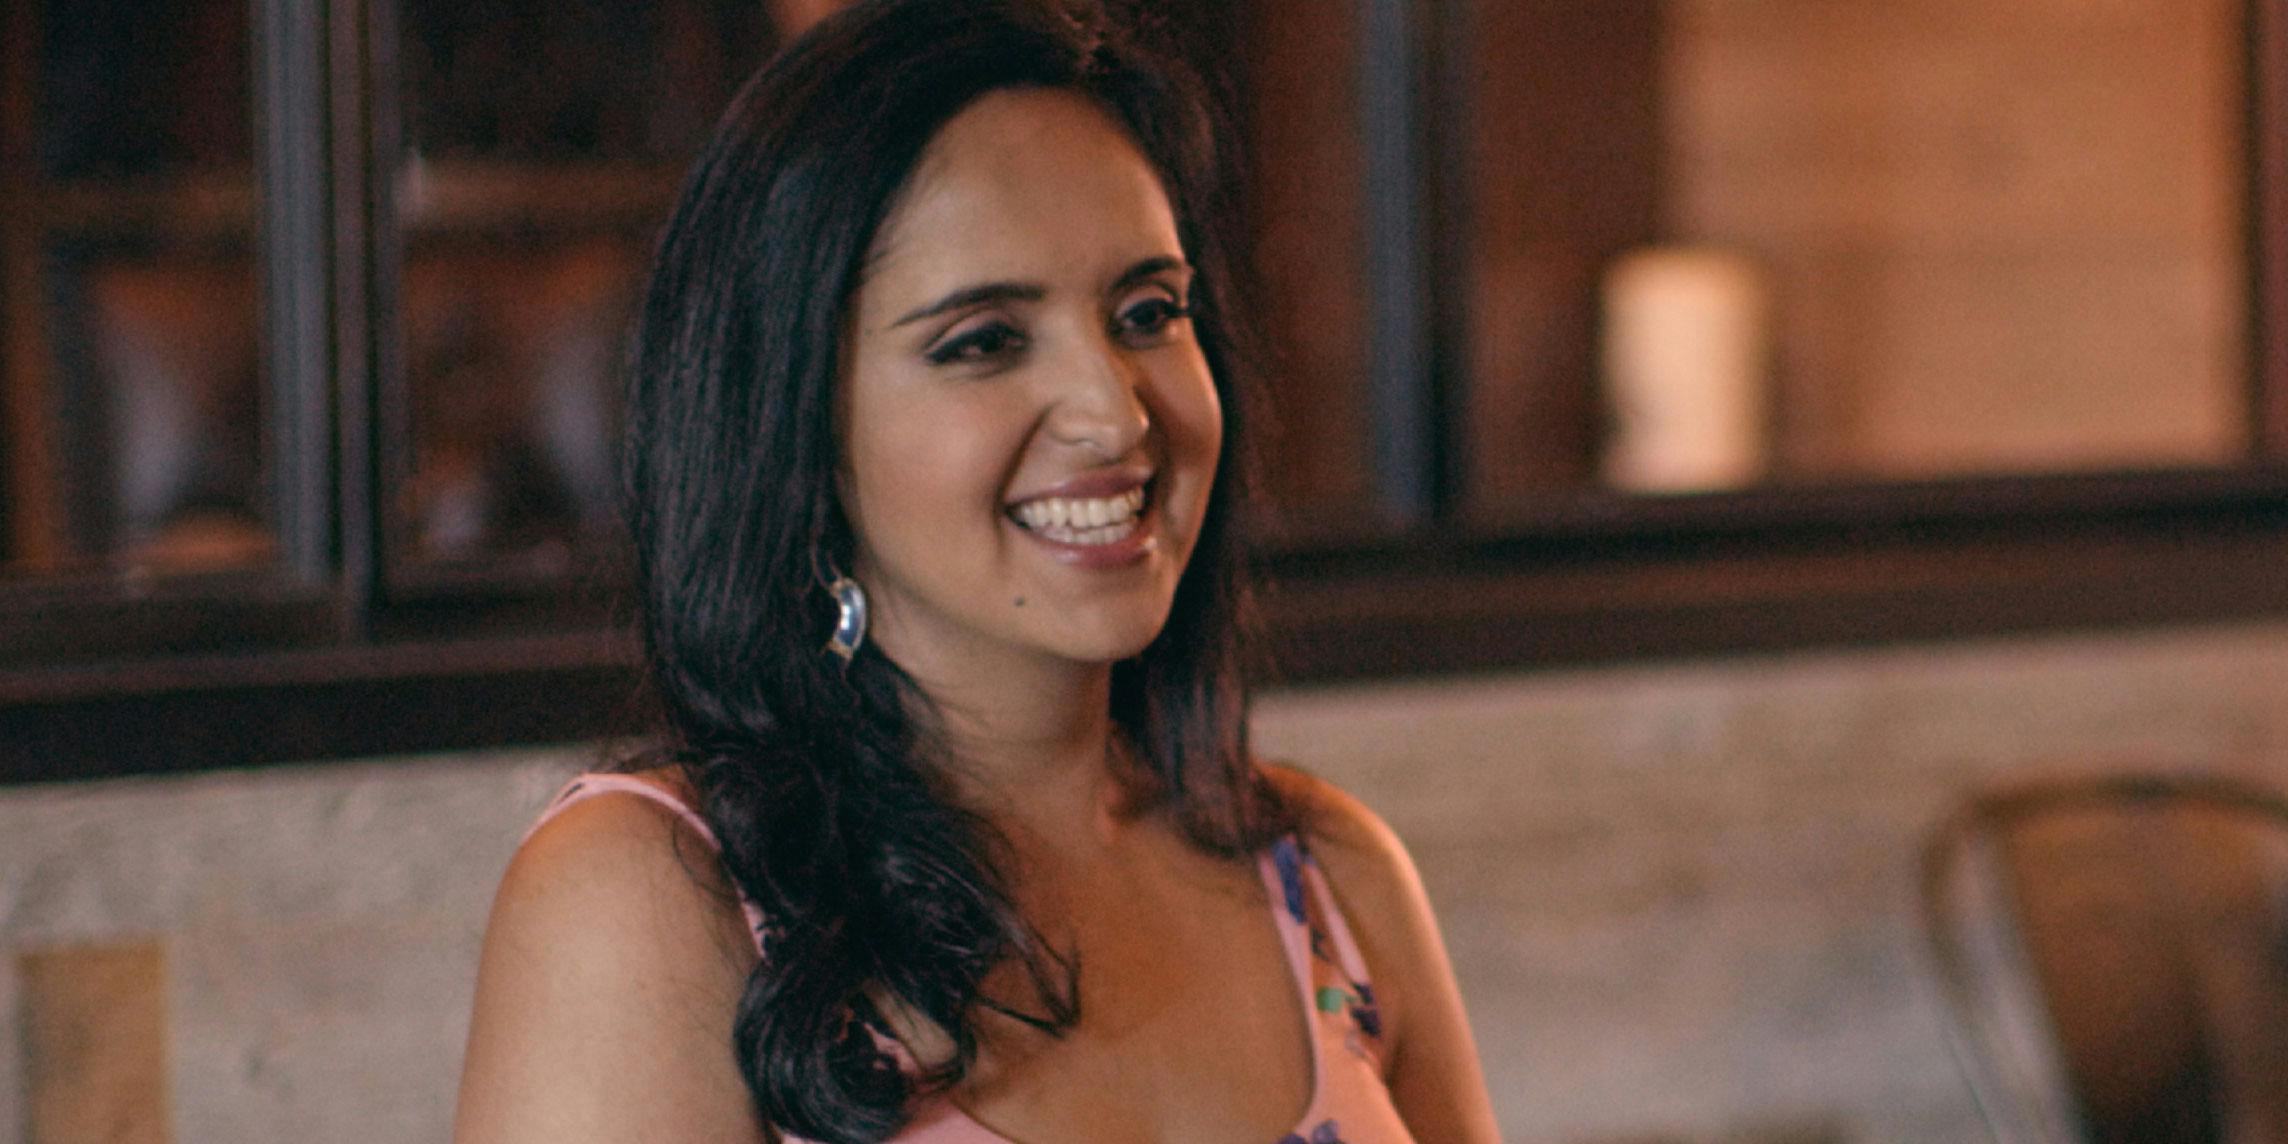 Houston lawyer Aparna Shewakramani, now 35, is one of the South Asian Americans who participated in the first season of Netflix's "Indian Matchmaking." (Netflix)